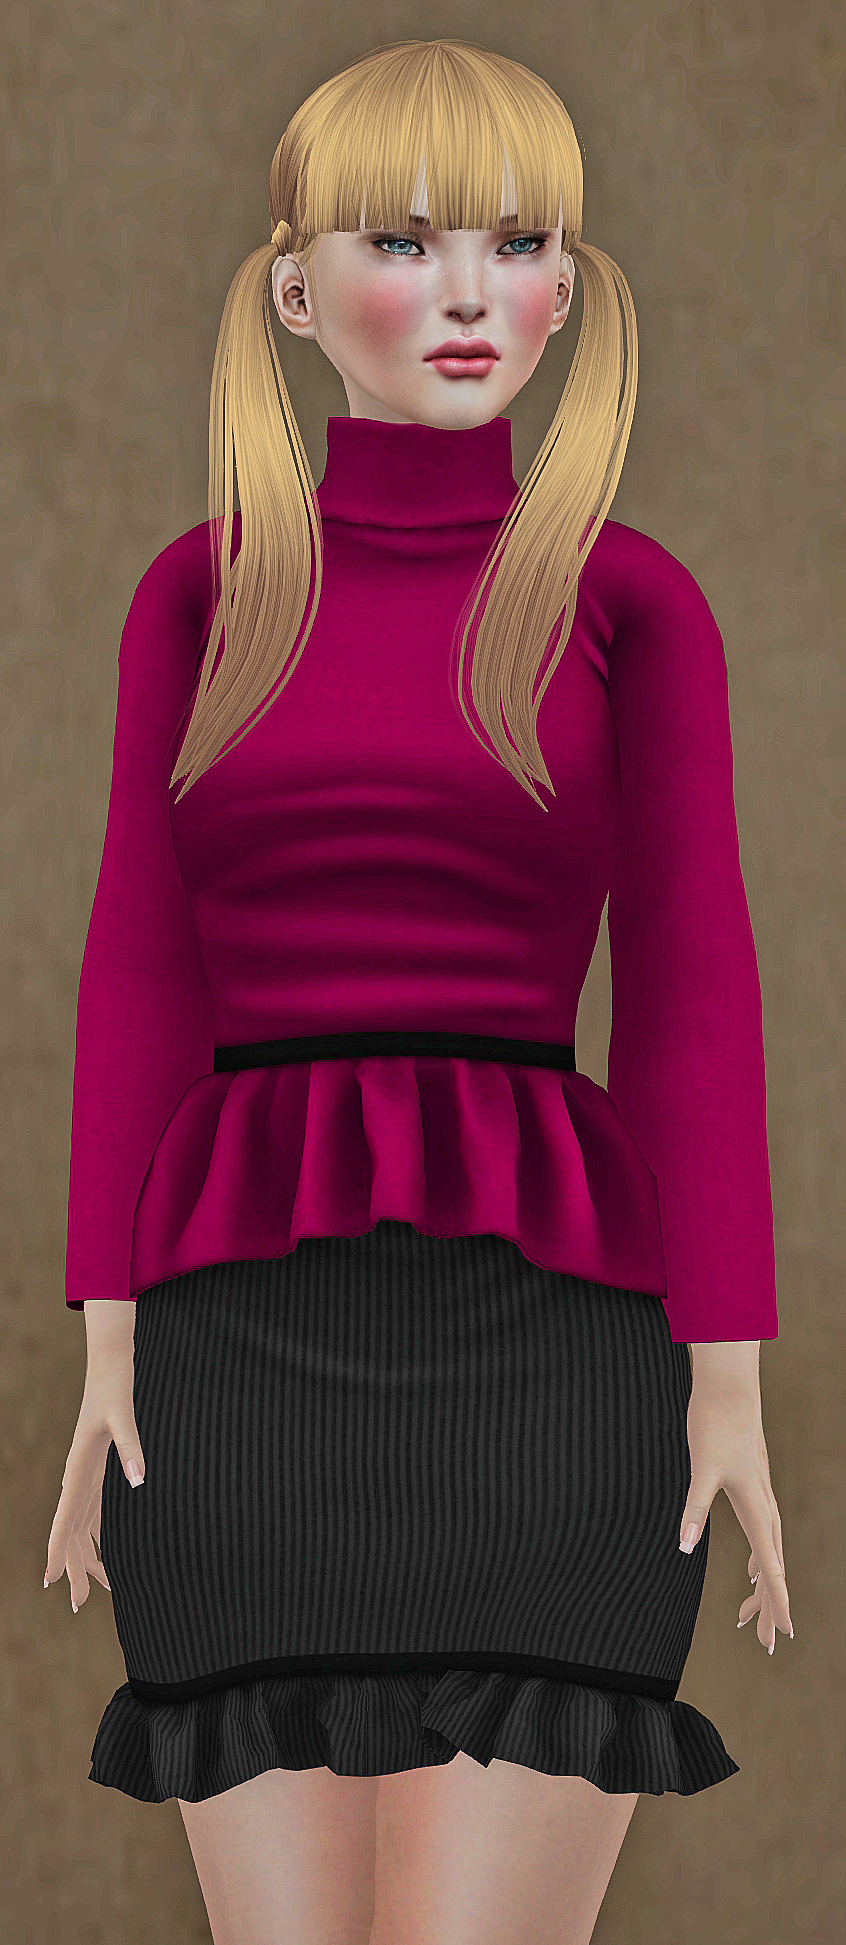 the model in the animated image is wearing a pink top